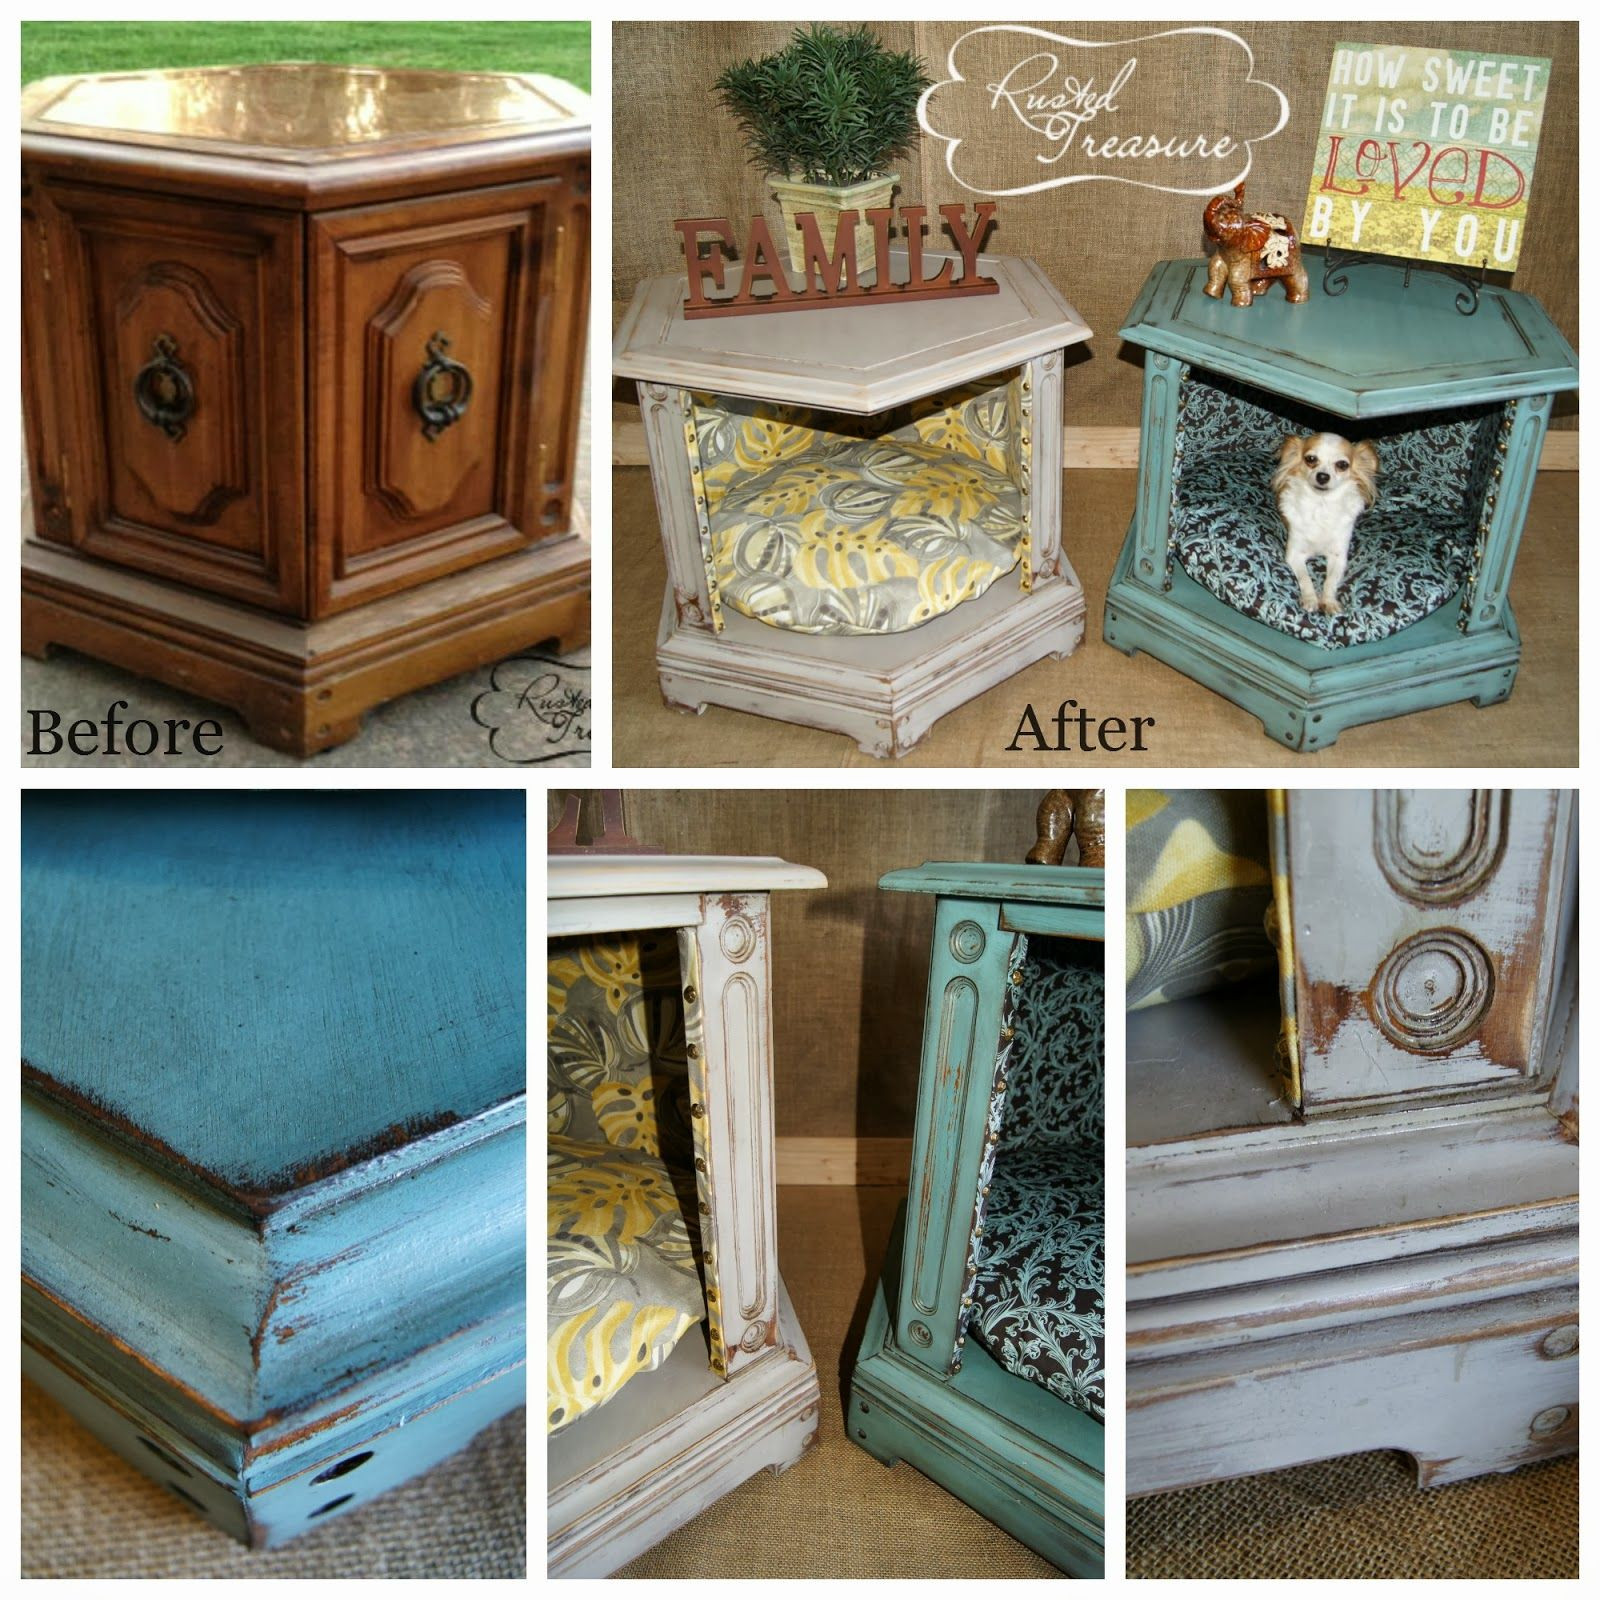 End Table Dog Bed DIY
 Repurposed and refinished end table dog beds